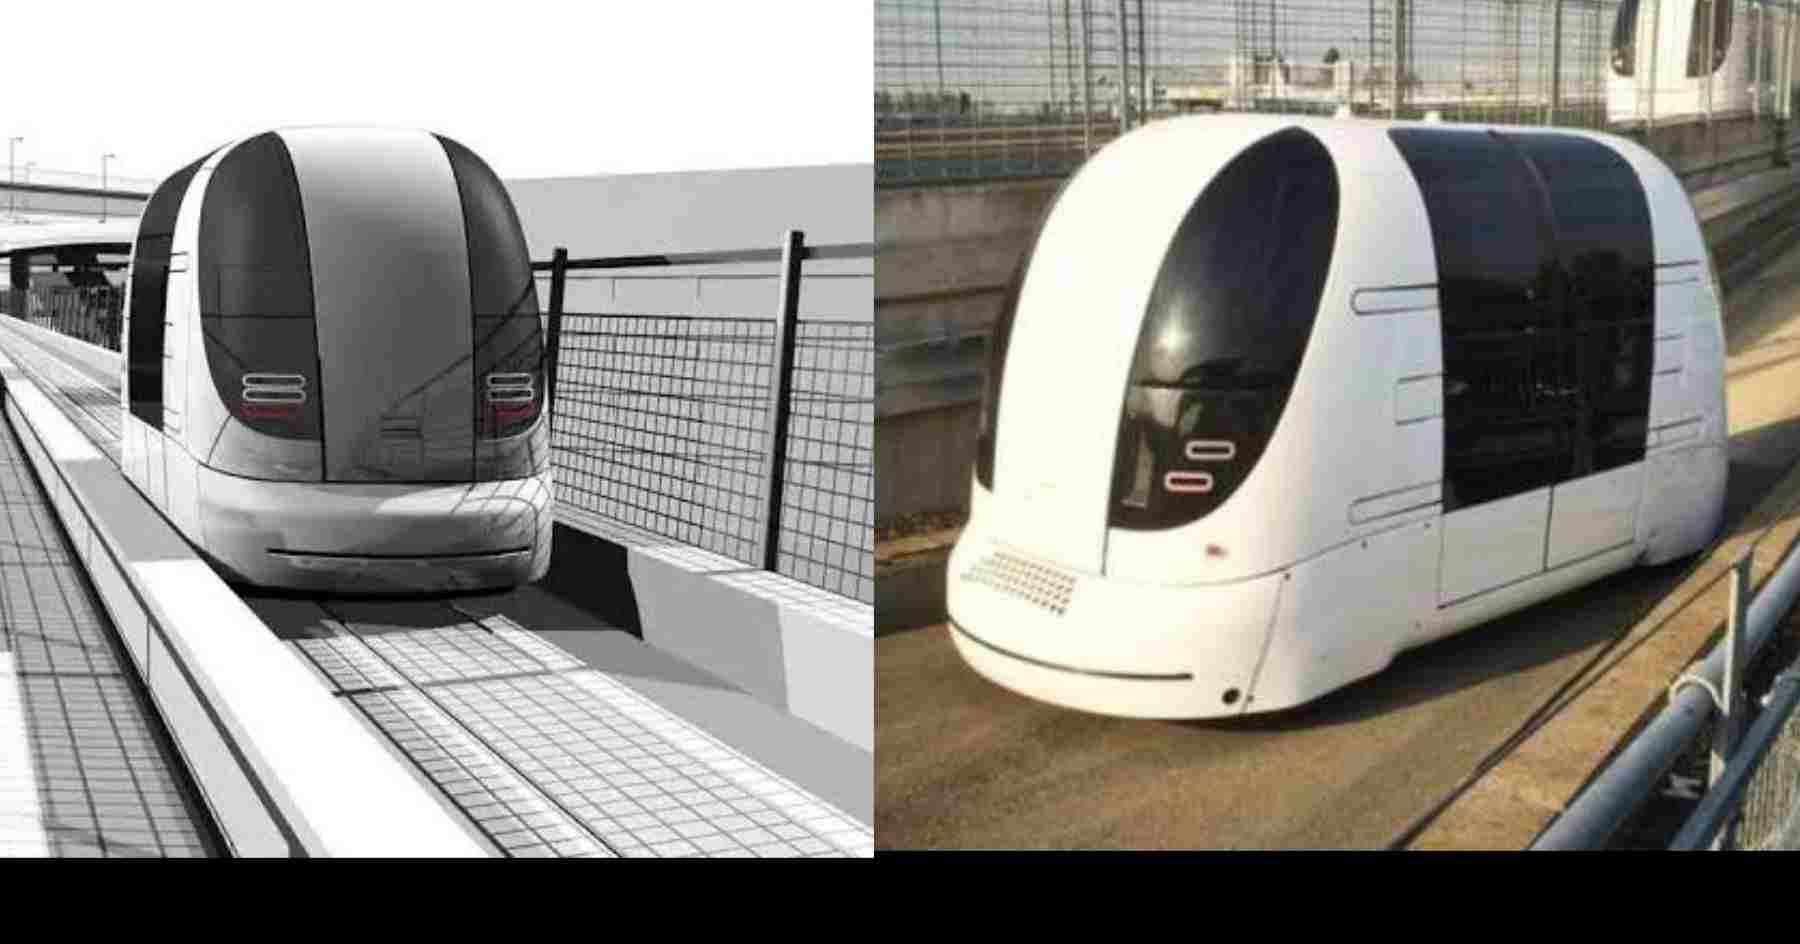 Uttarakhand news: Pod taxi will run on 21 kilometer route to connect major temples of Haridwar.